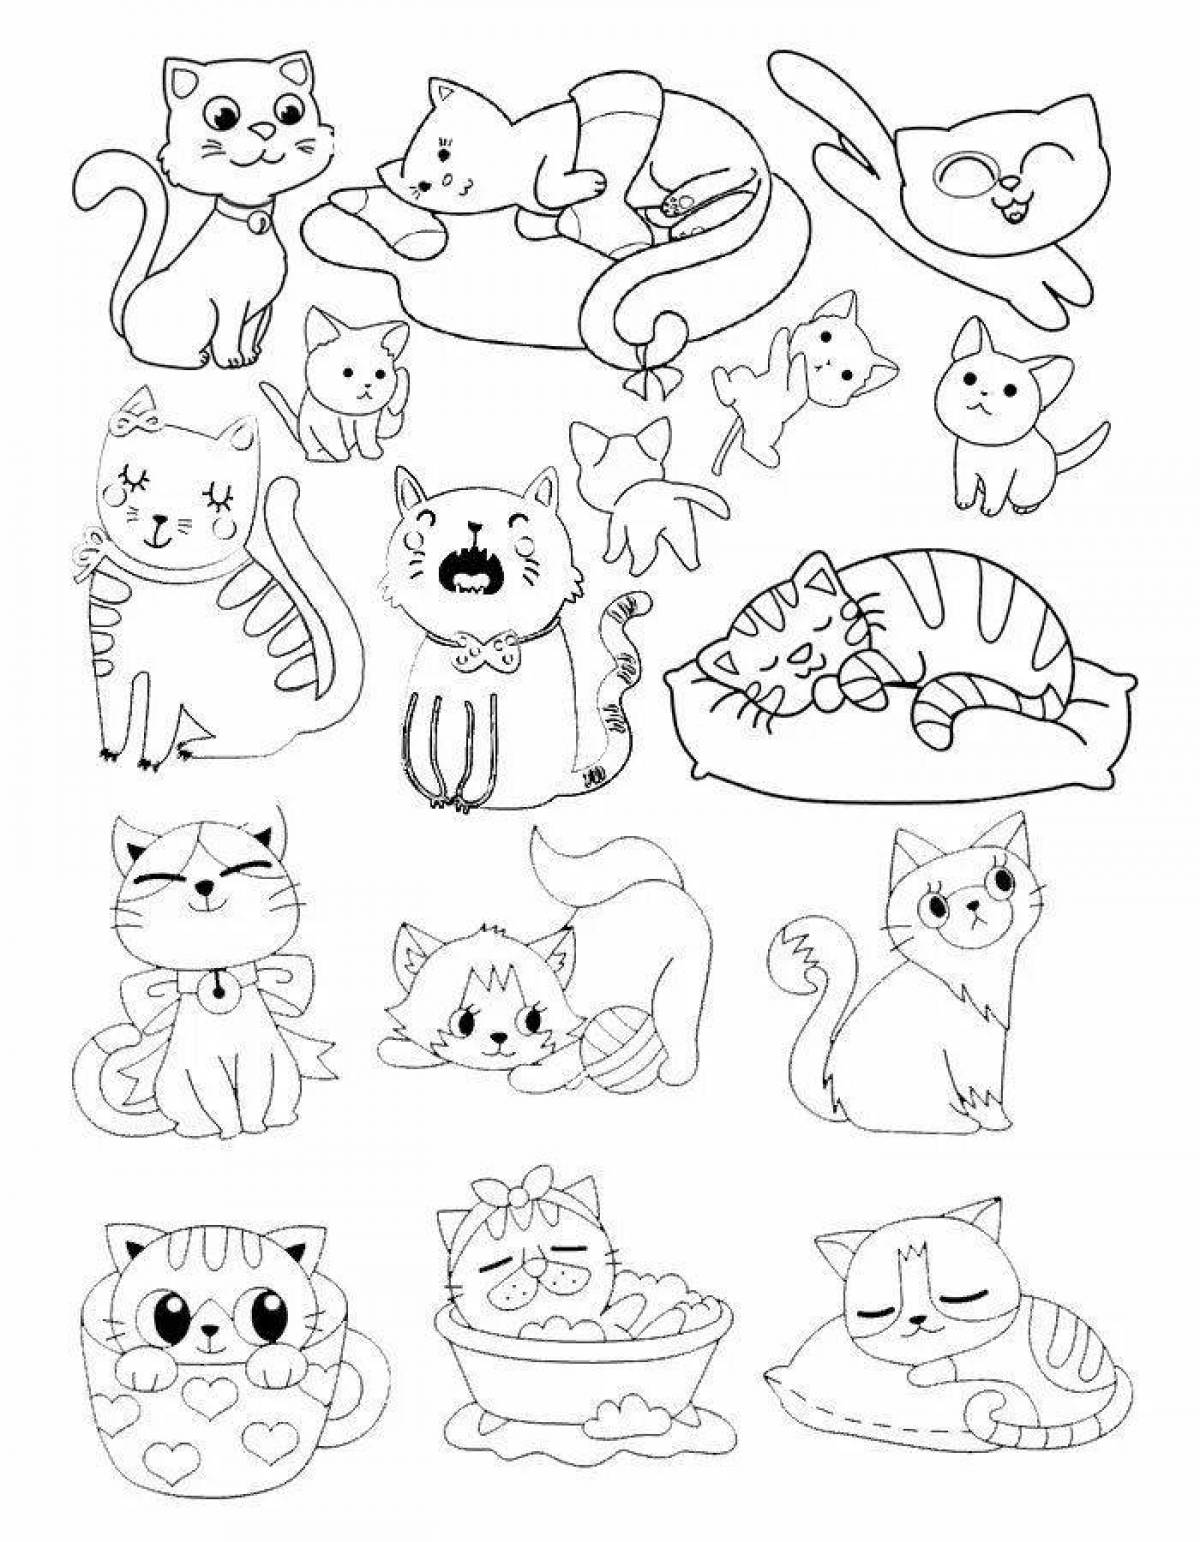 Silly cat coloring